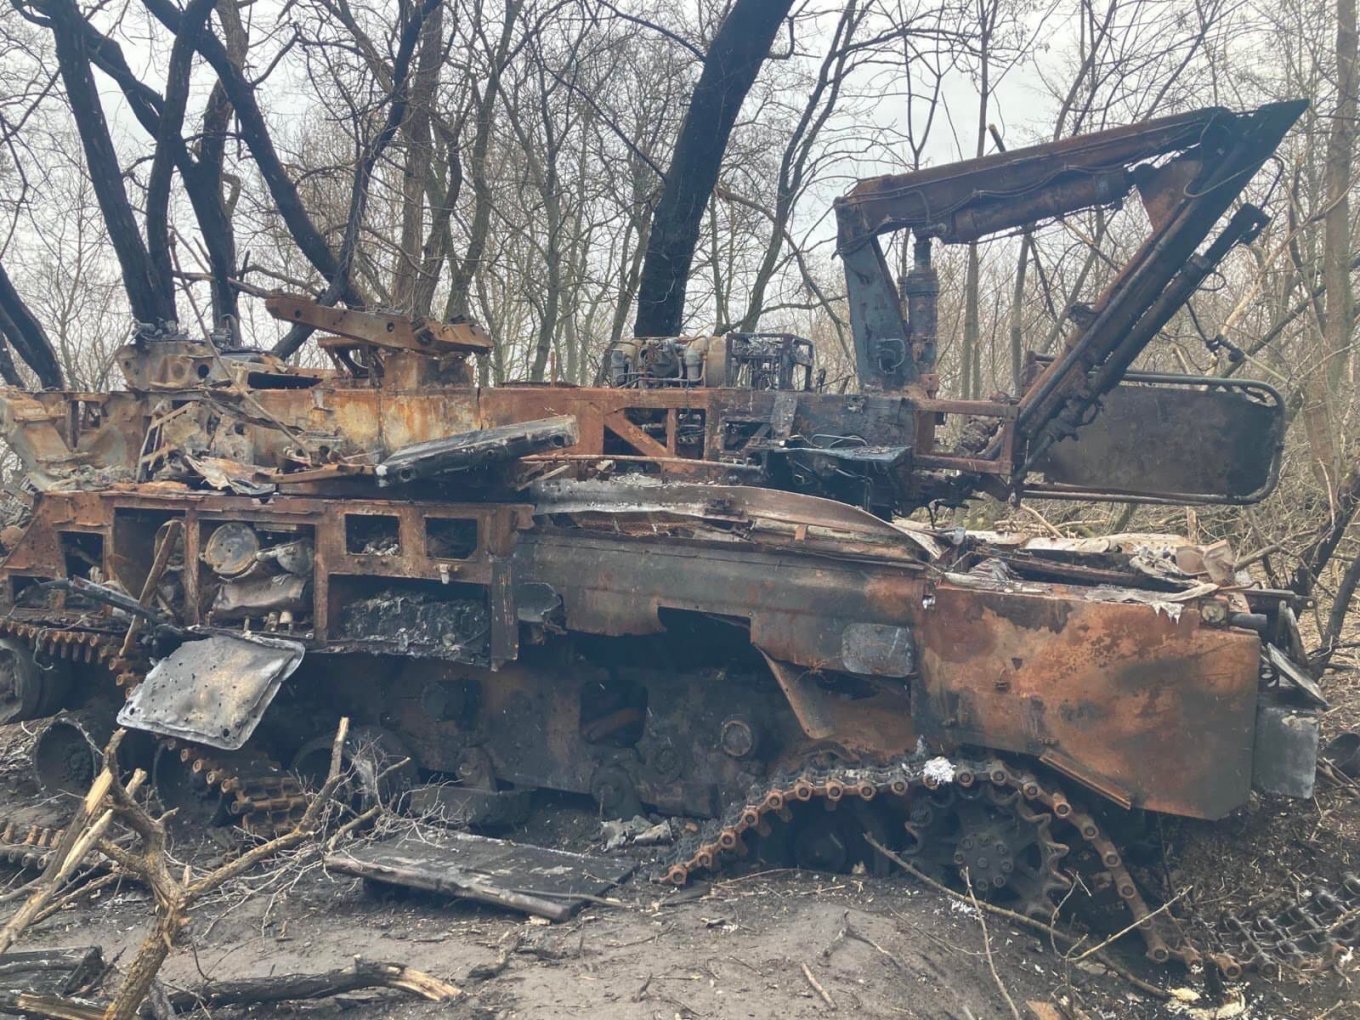 Ukrainian SOF Operators have got Hold of More Russian Combat Vehicles and Ammunition they Seized as Spoils of War, Defense Express